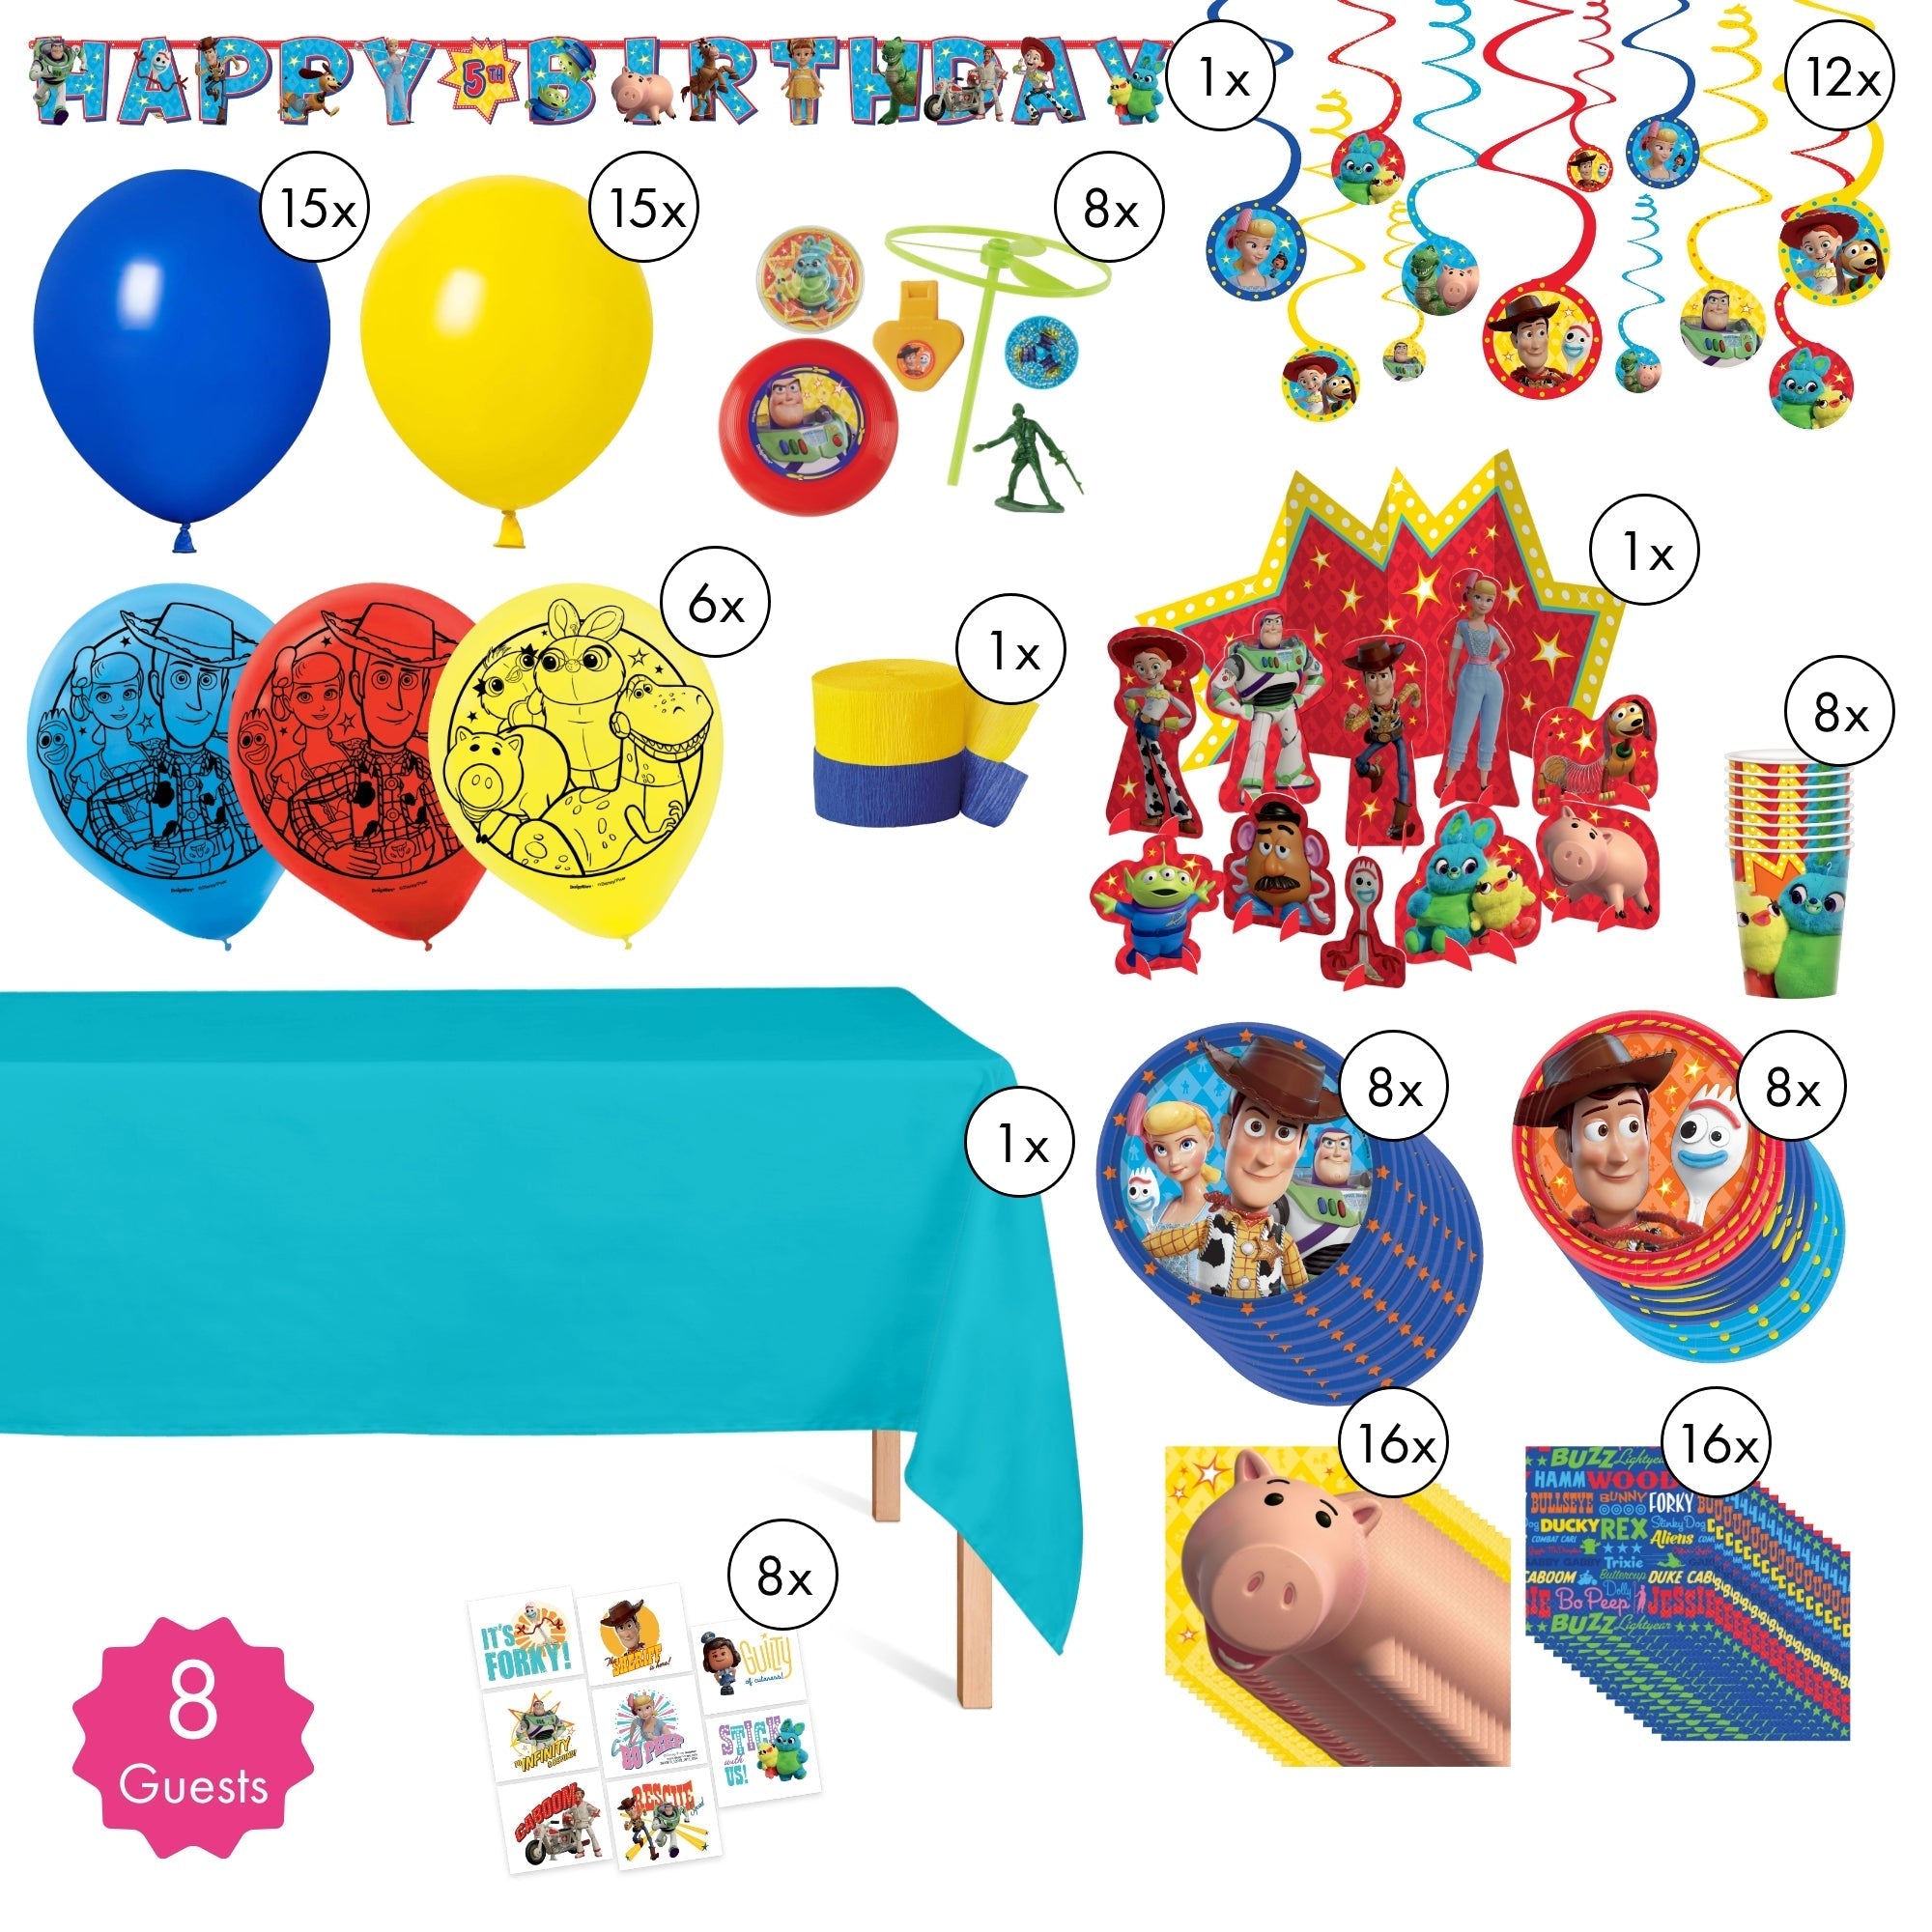 Toy Story Standard Birthday Party Supplies Kit